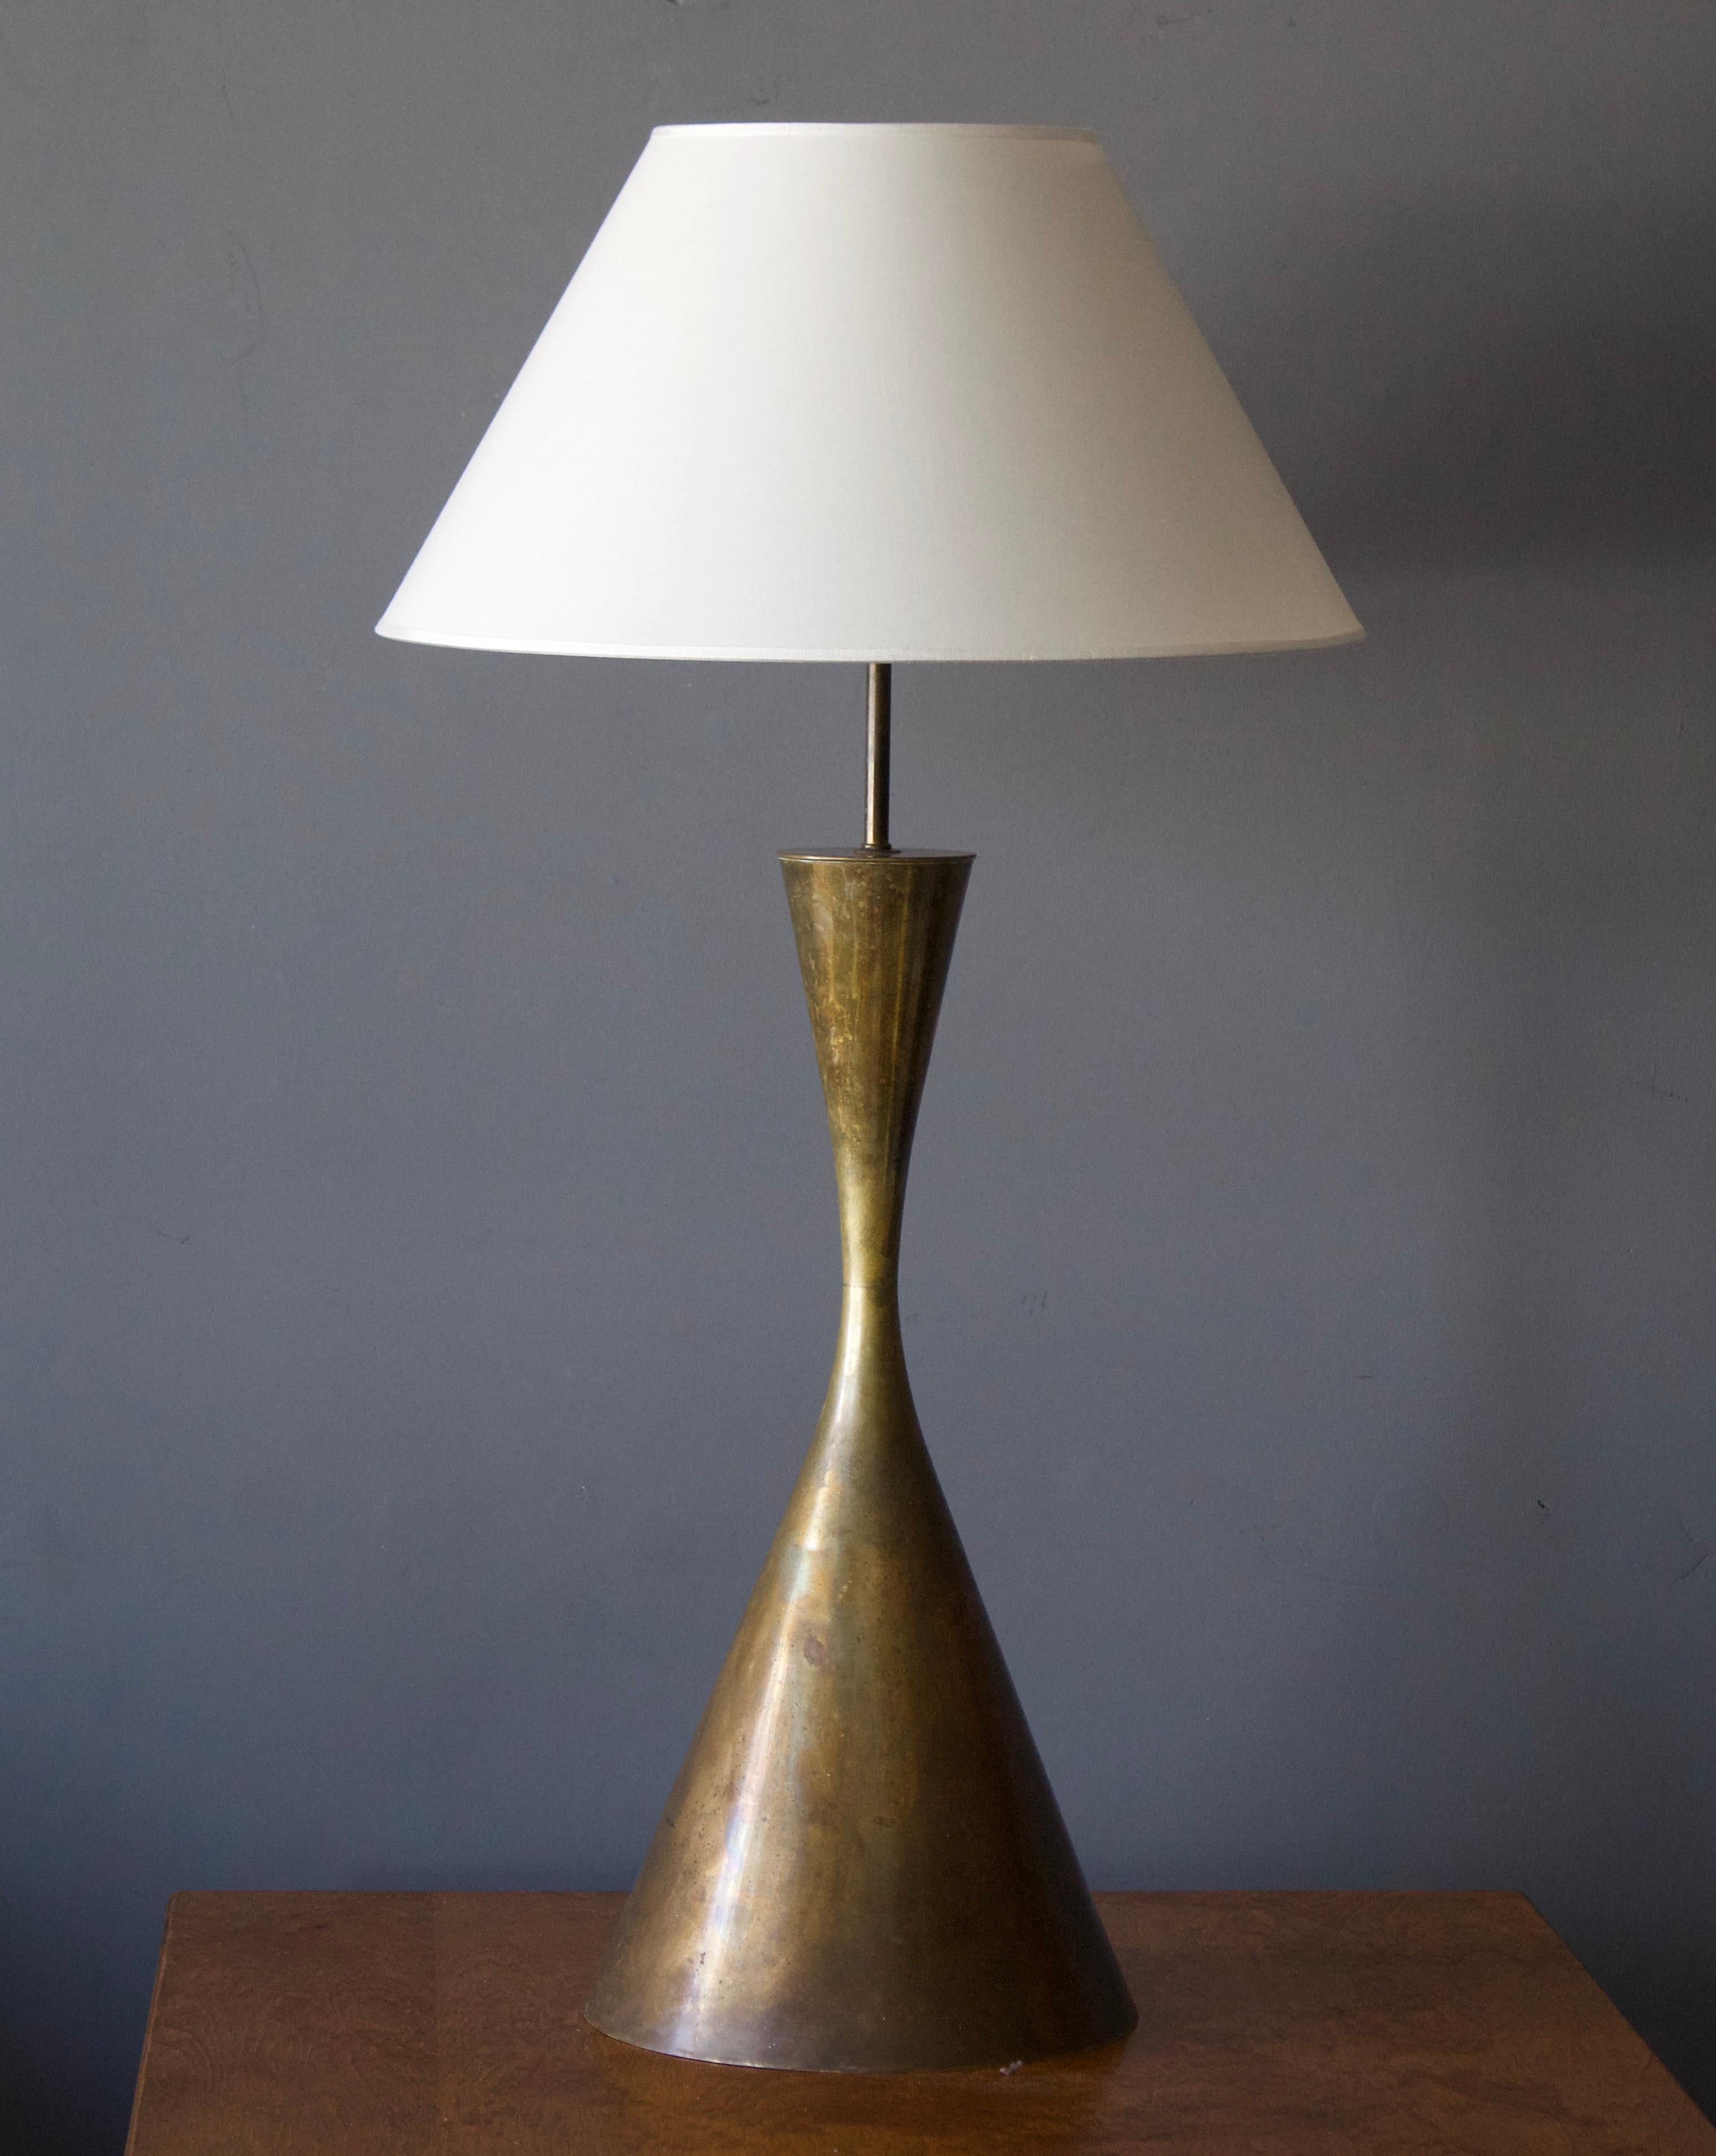 A large table lamp produced by Arredoluce, Monza, circa 1960s. Design attributed to Angelo Lelii, founder of Arredoluce. With manufacturers metal plaque to underside stamped 